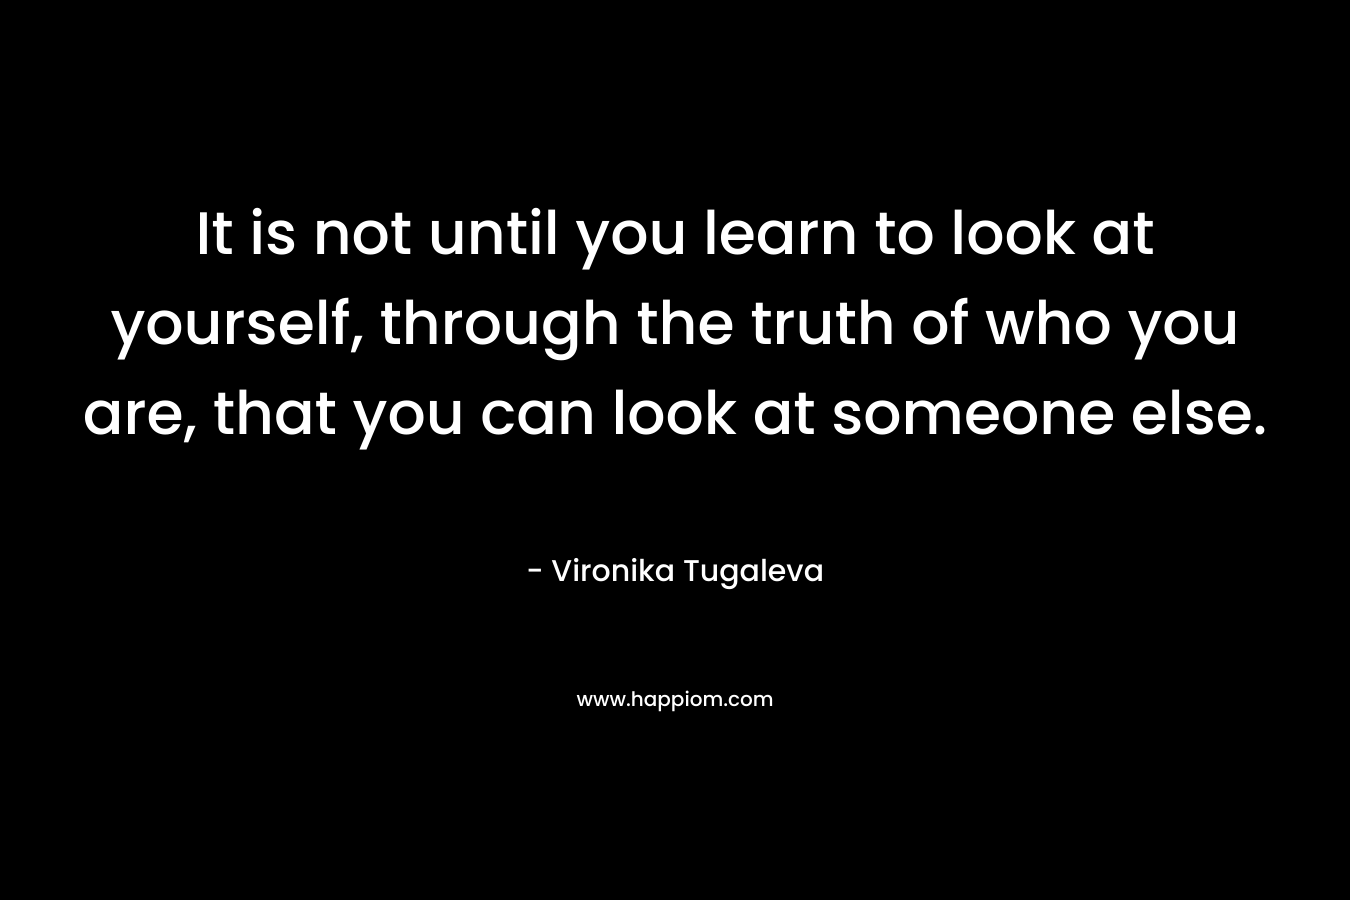 It is not until you learn to look at yourself, through the truth of who you are, that you can look at someone else.